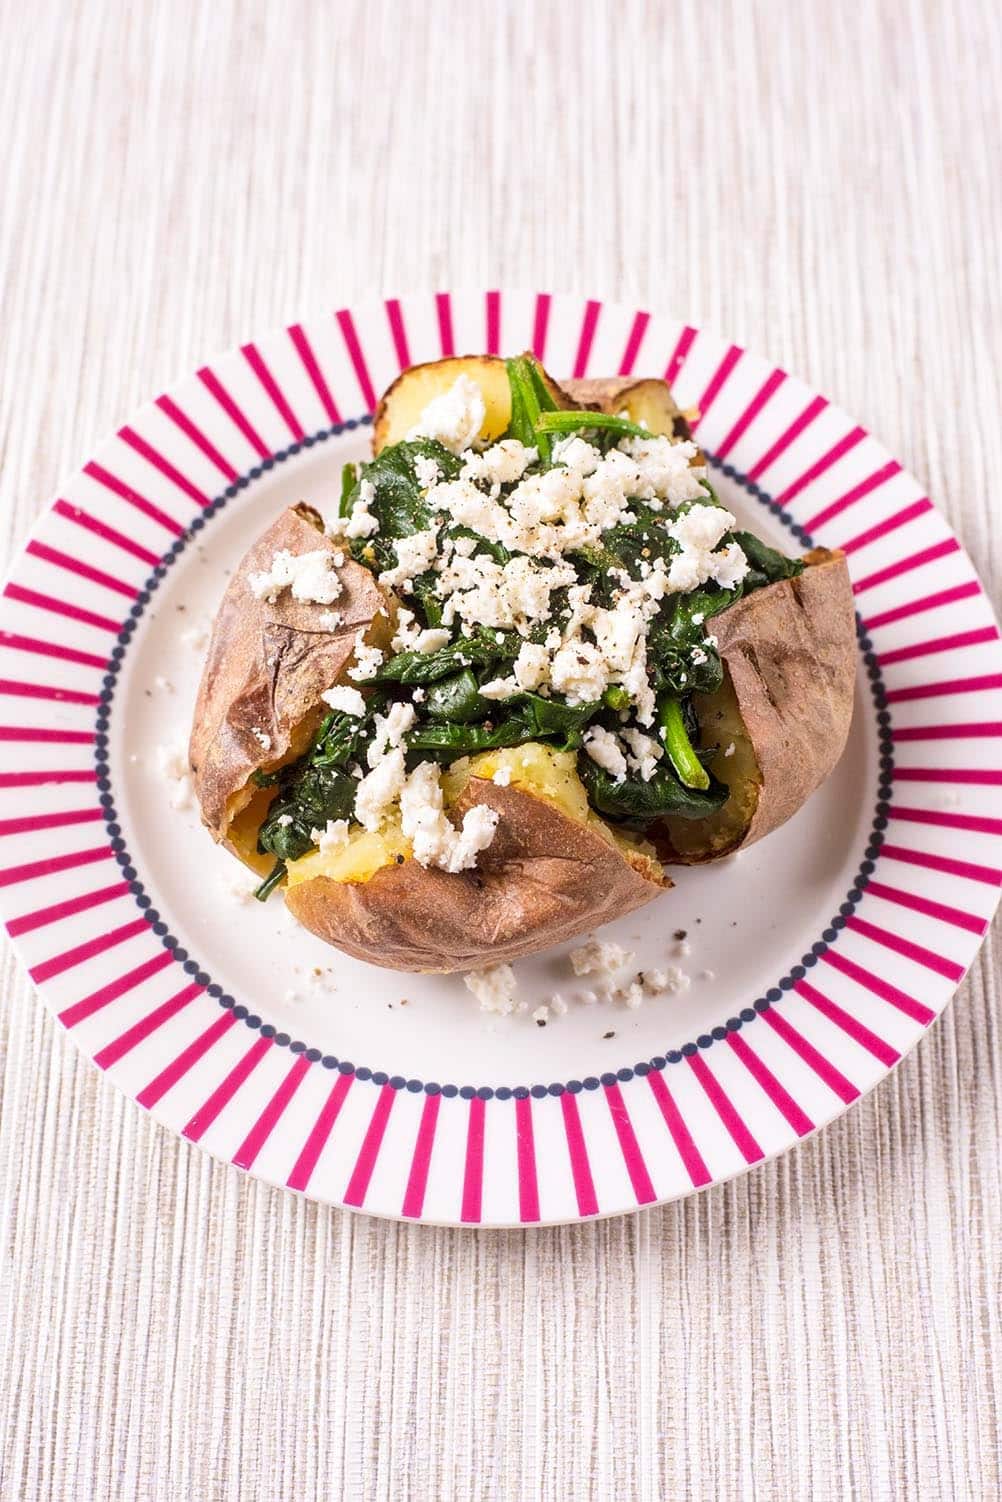 Baked Potato topped with Spinach and Feta on a red and white plate.